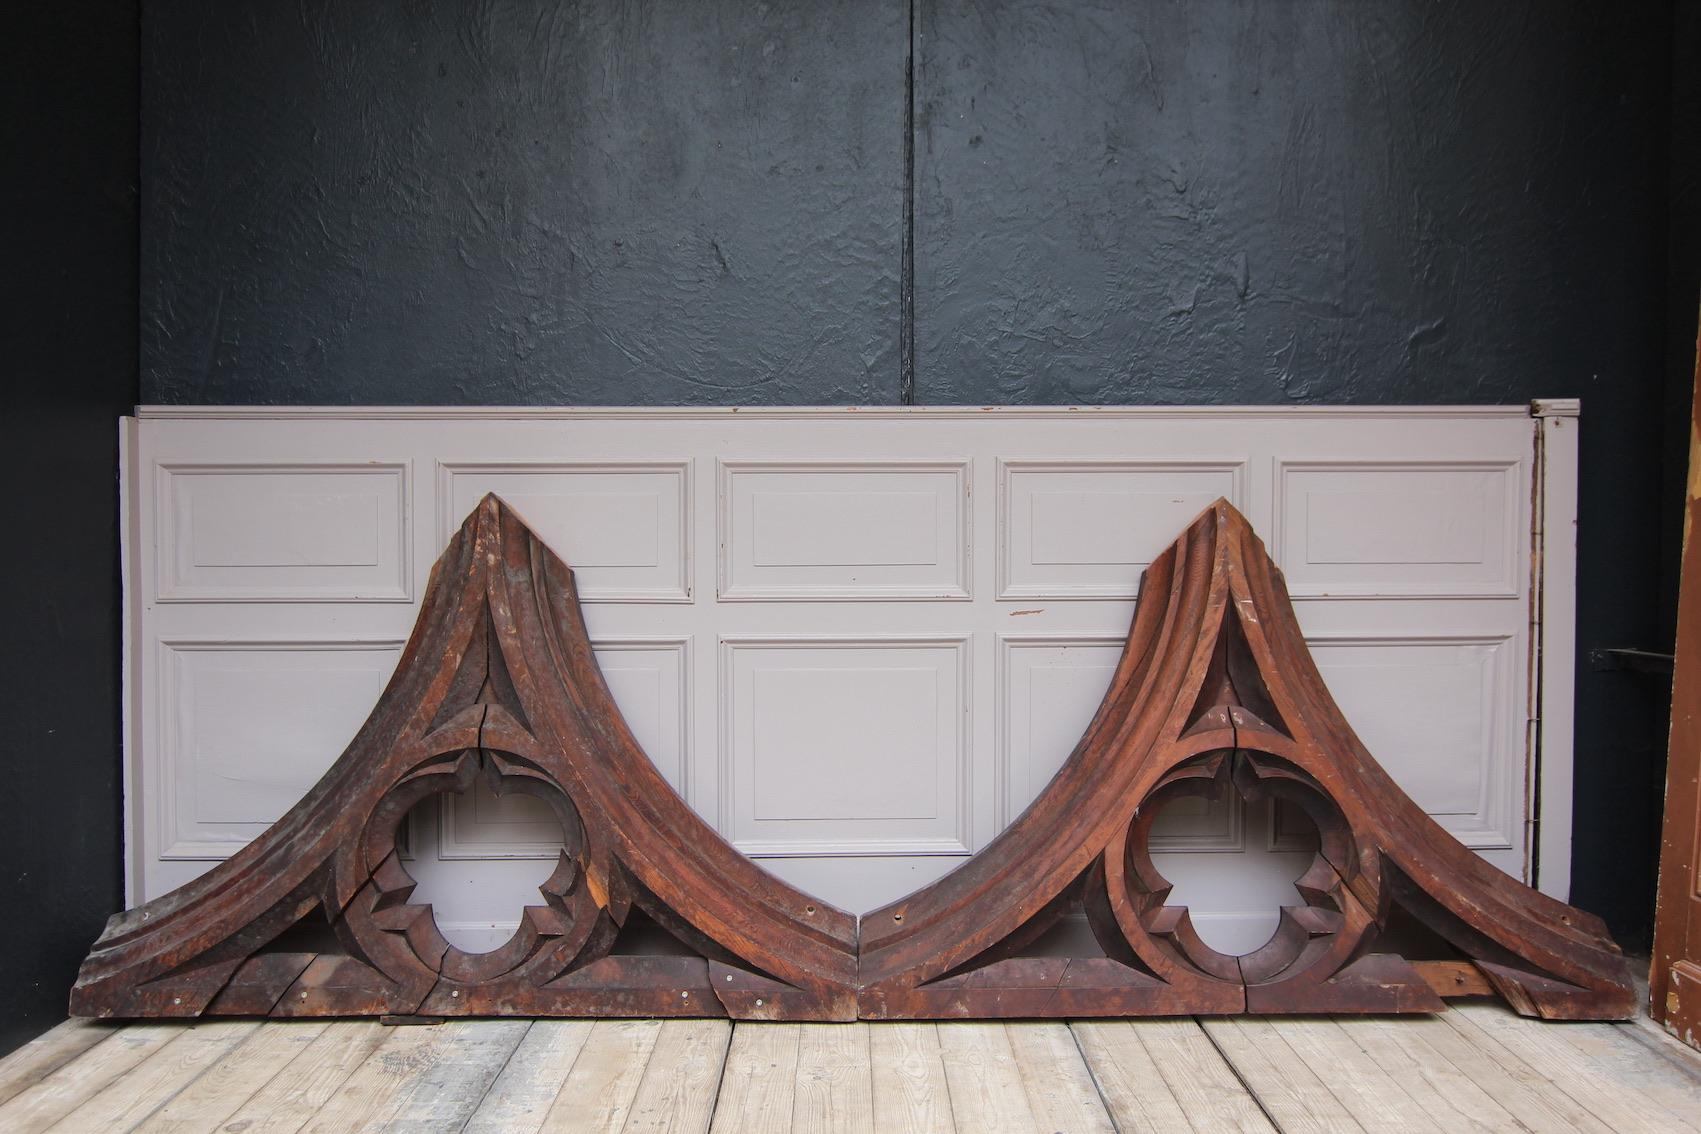 A set consisting of 4 arcade building elements in neo-Gothic style. Solidly made of pitch pine wood.

The 4 elements can be put together to form 3 arcades (arches) once you mount them on columns. (Photographed upside down in the